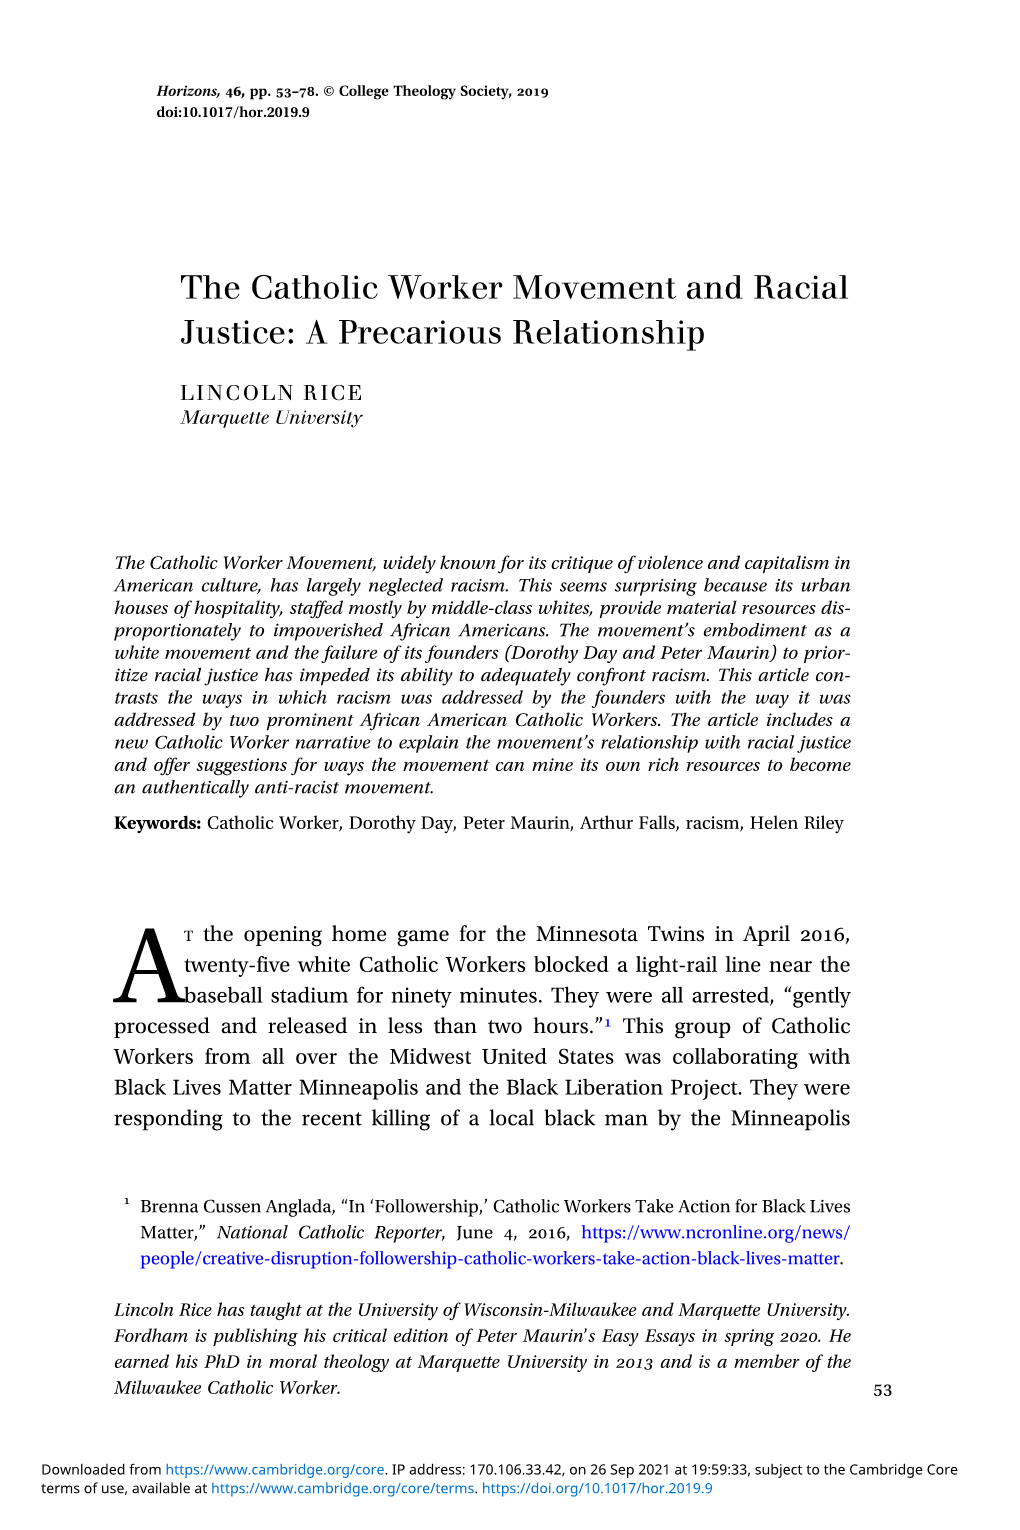 The Catholic Worker Movement and Racial Justice: a Precarious Relationship